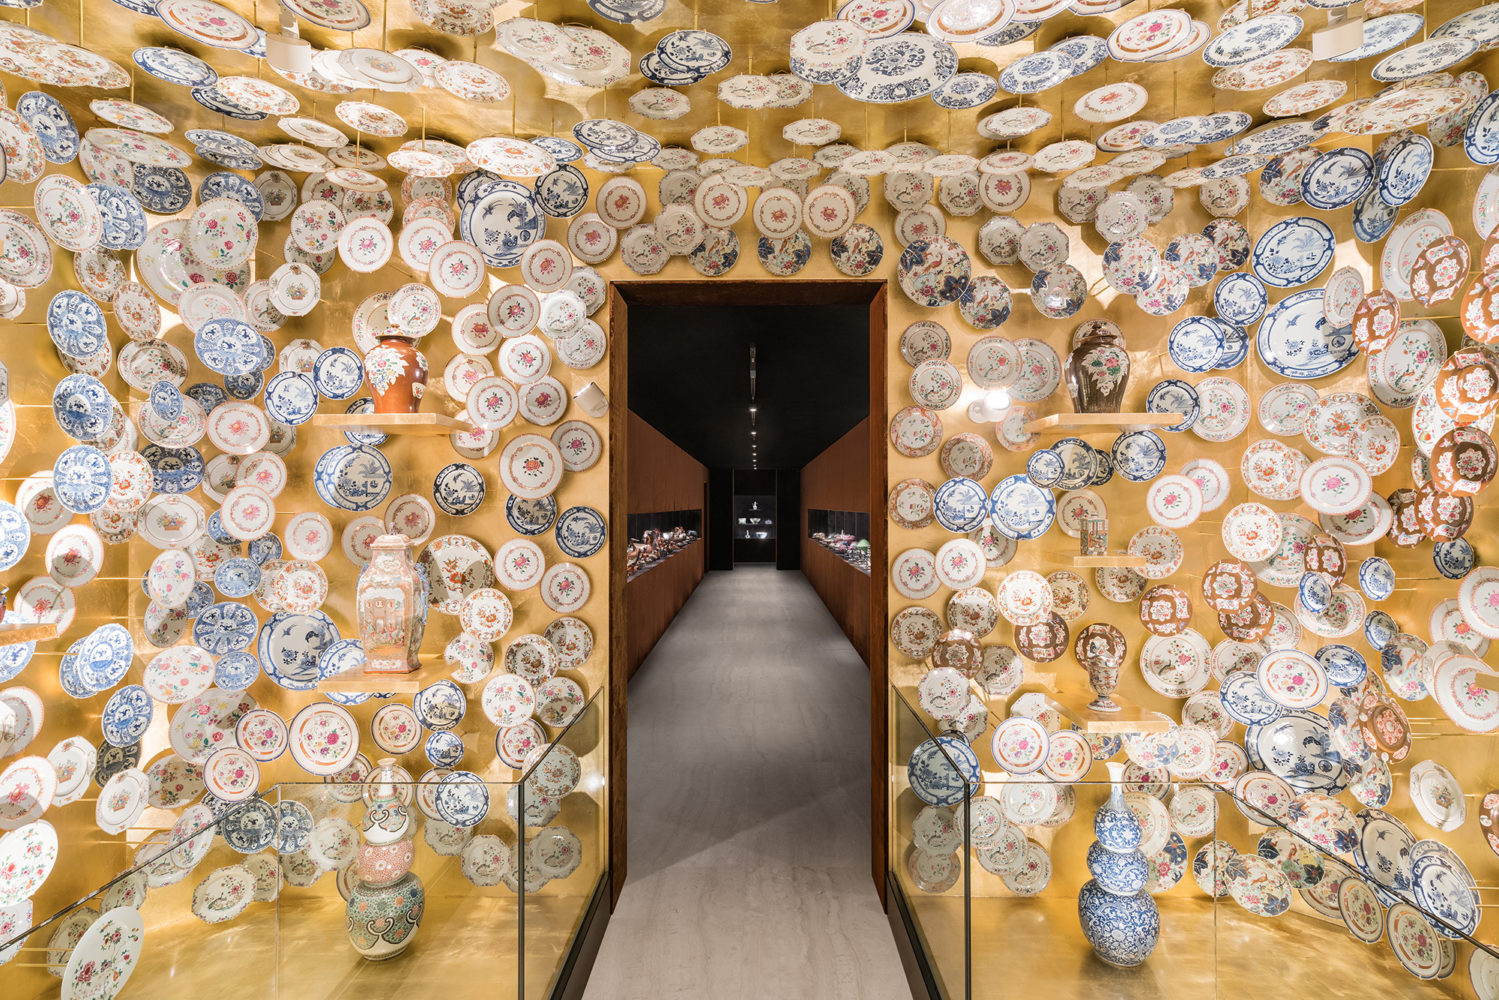 “The Porcelain Room – Chinese Export Porcelain" at Fondazione Prada